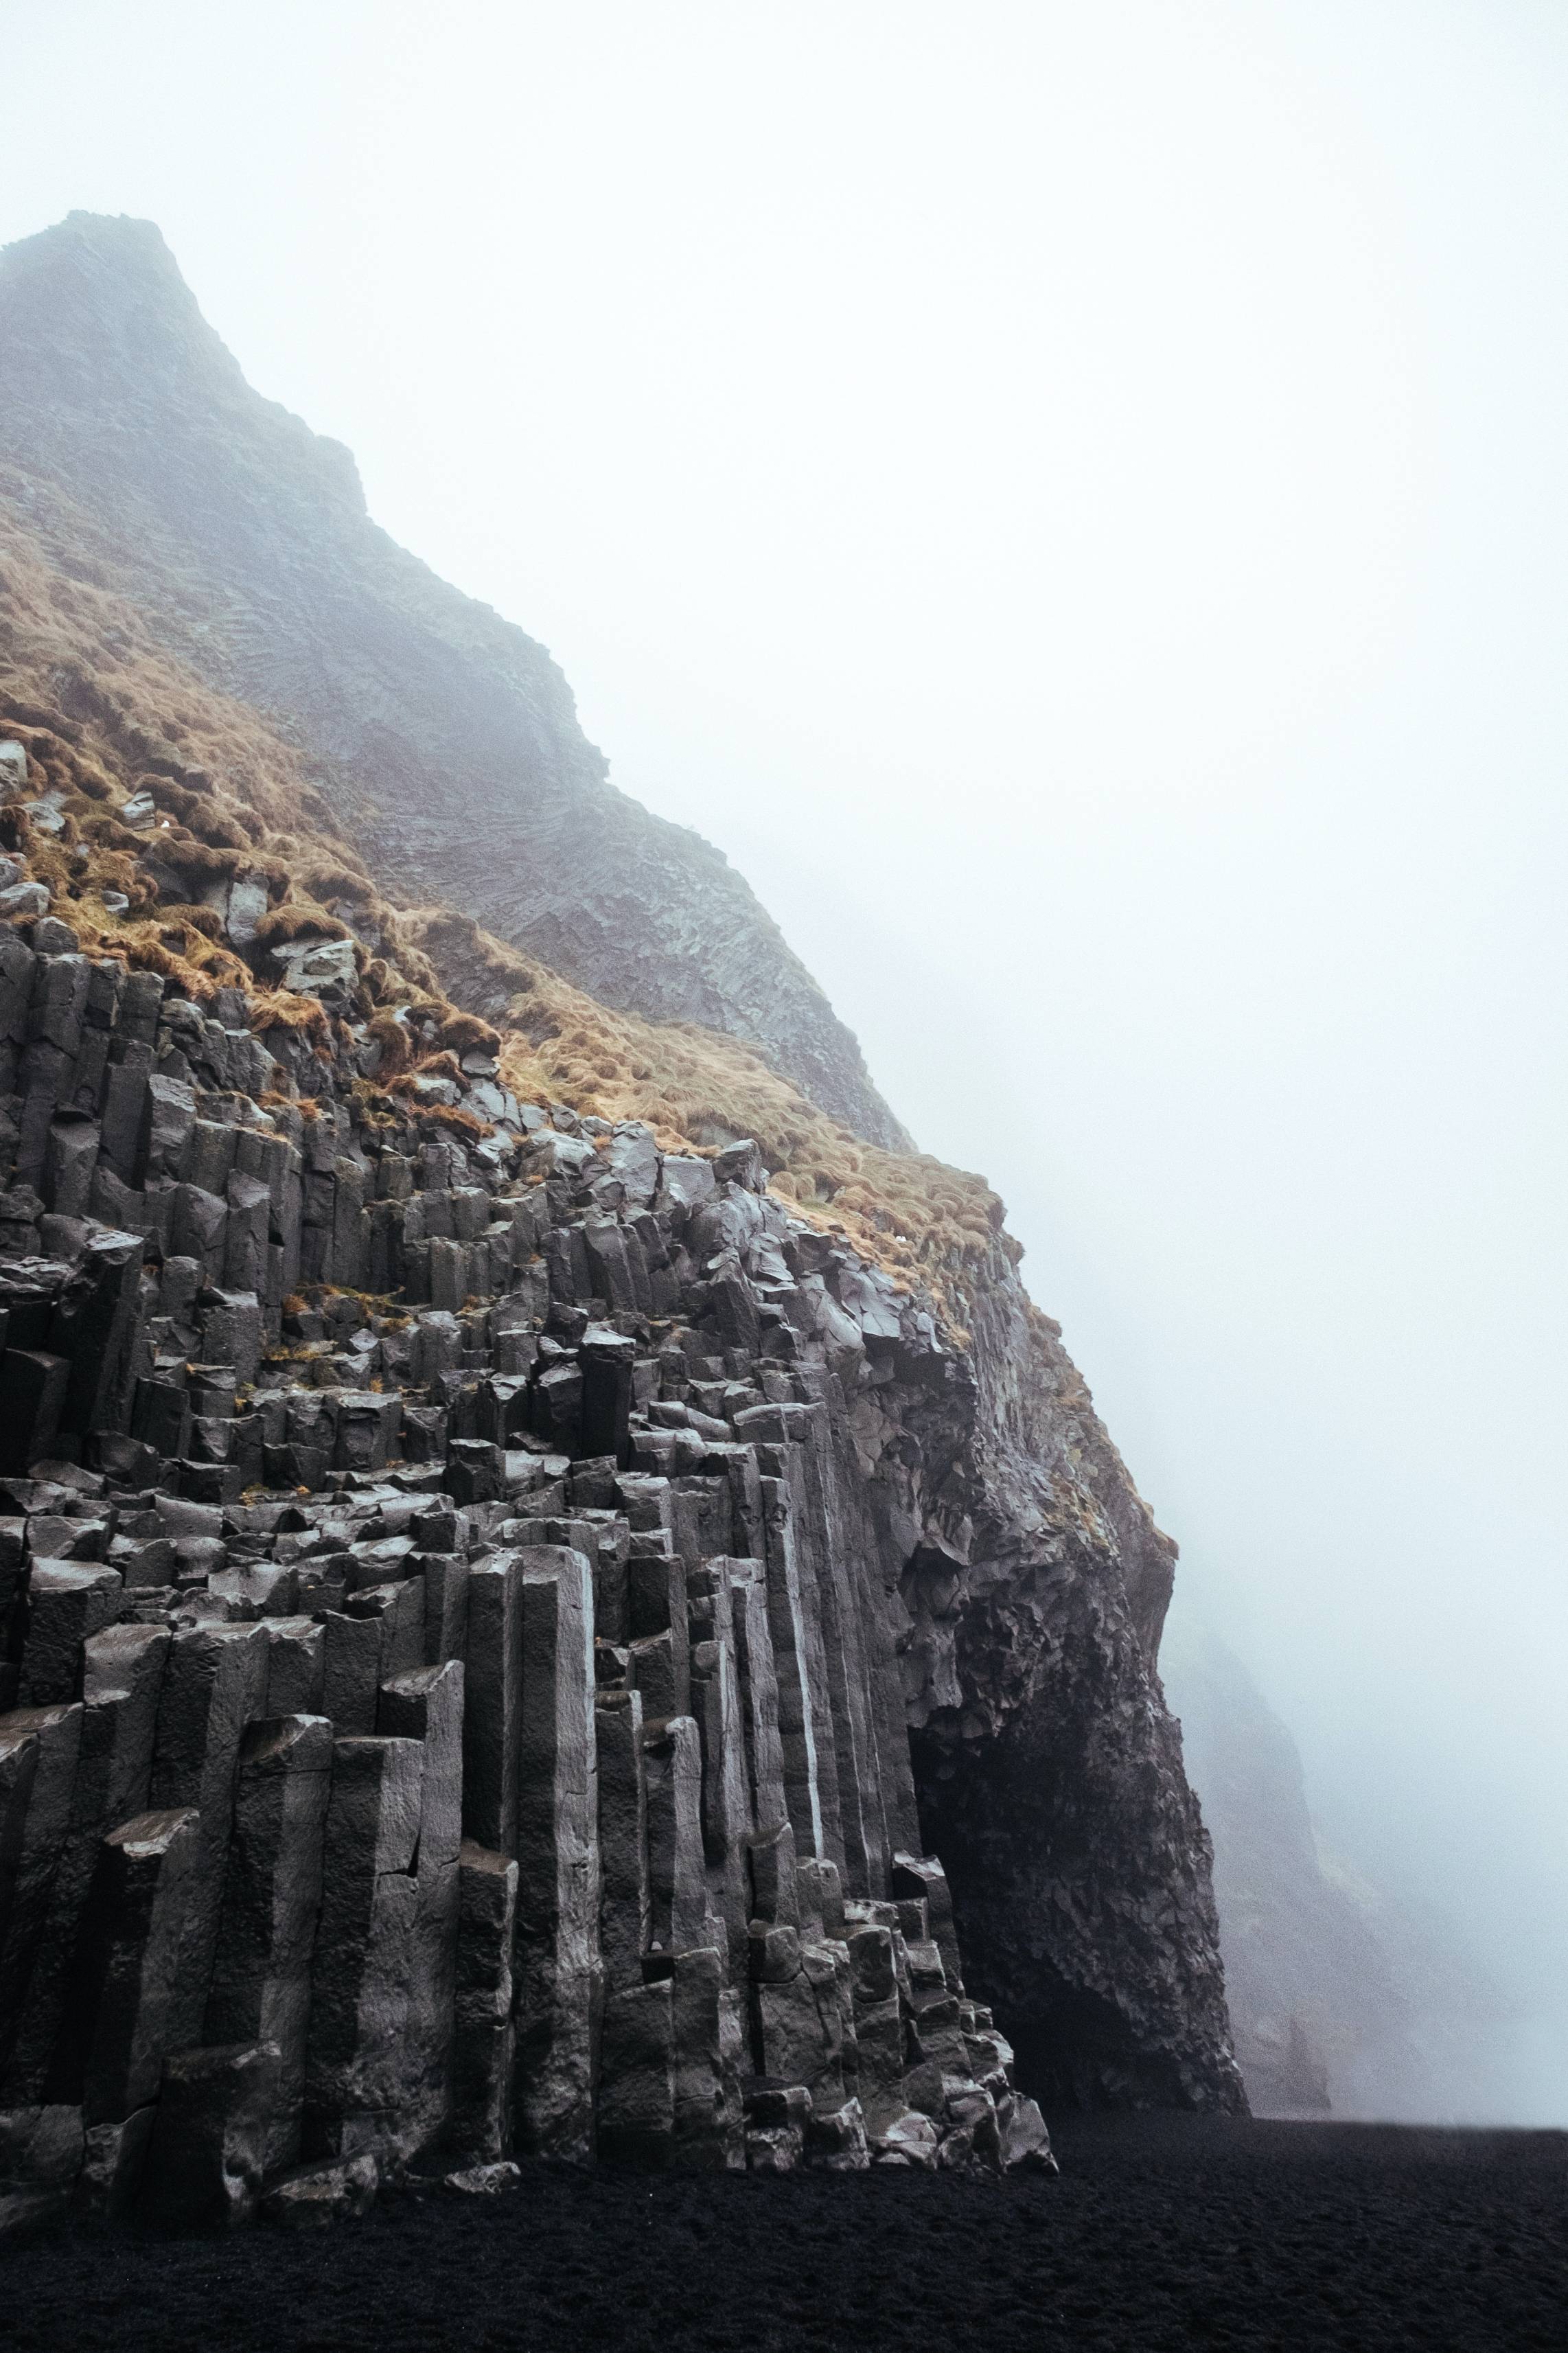 Reynisfjara-basalt-columns-and-cave-opening-seen-from-beach-with-yellow-grass-on-top-surrounded-by-the-ocean-mist